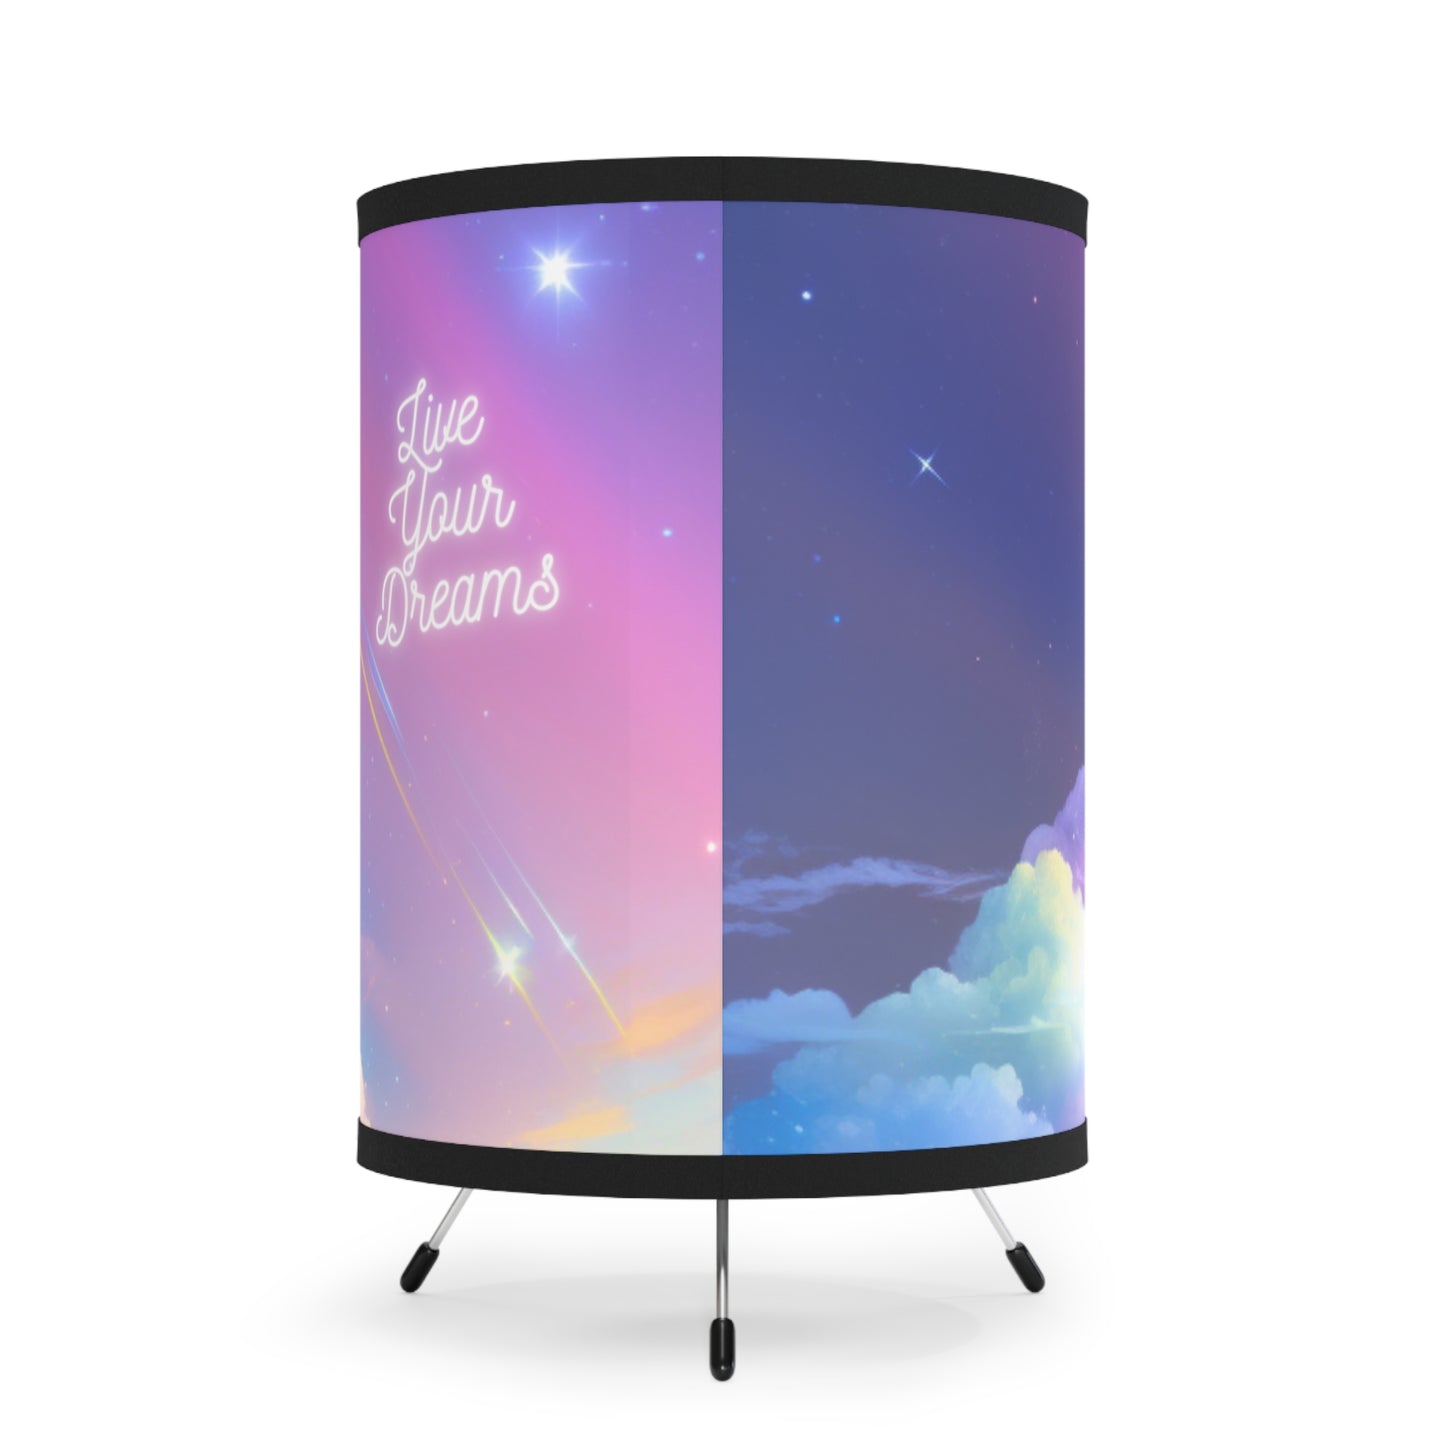 Rainbow Dreams Desk Accent Lamp From Big Fairy Tales By Schatar